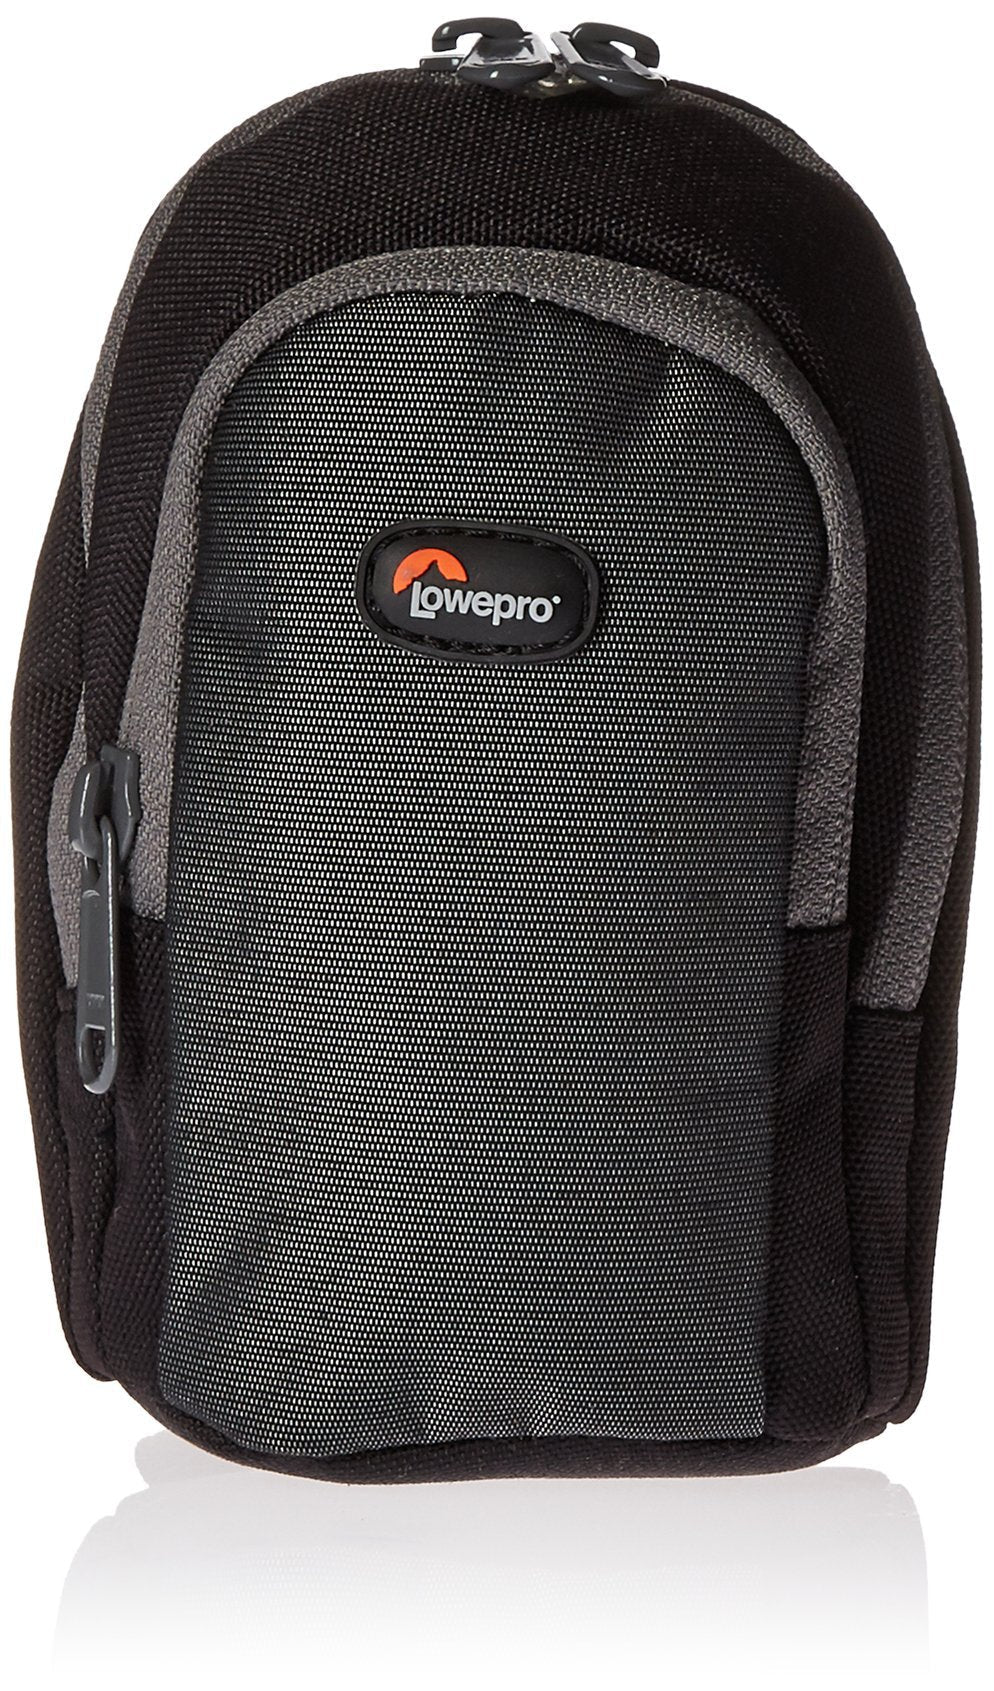 Lowepro Portland 30 Camera Bag - A Protective Camera Pouch For Your Point and Shoot Camera and Accessories LP36516